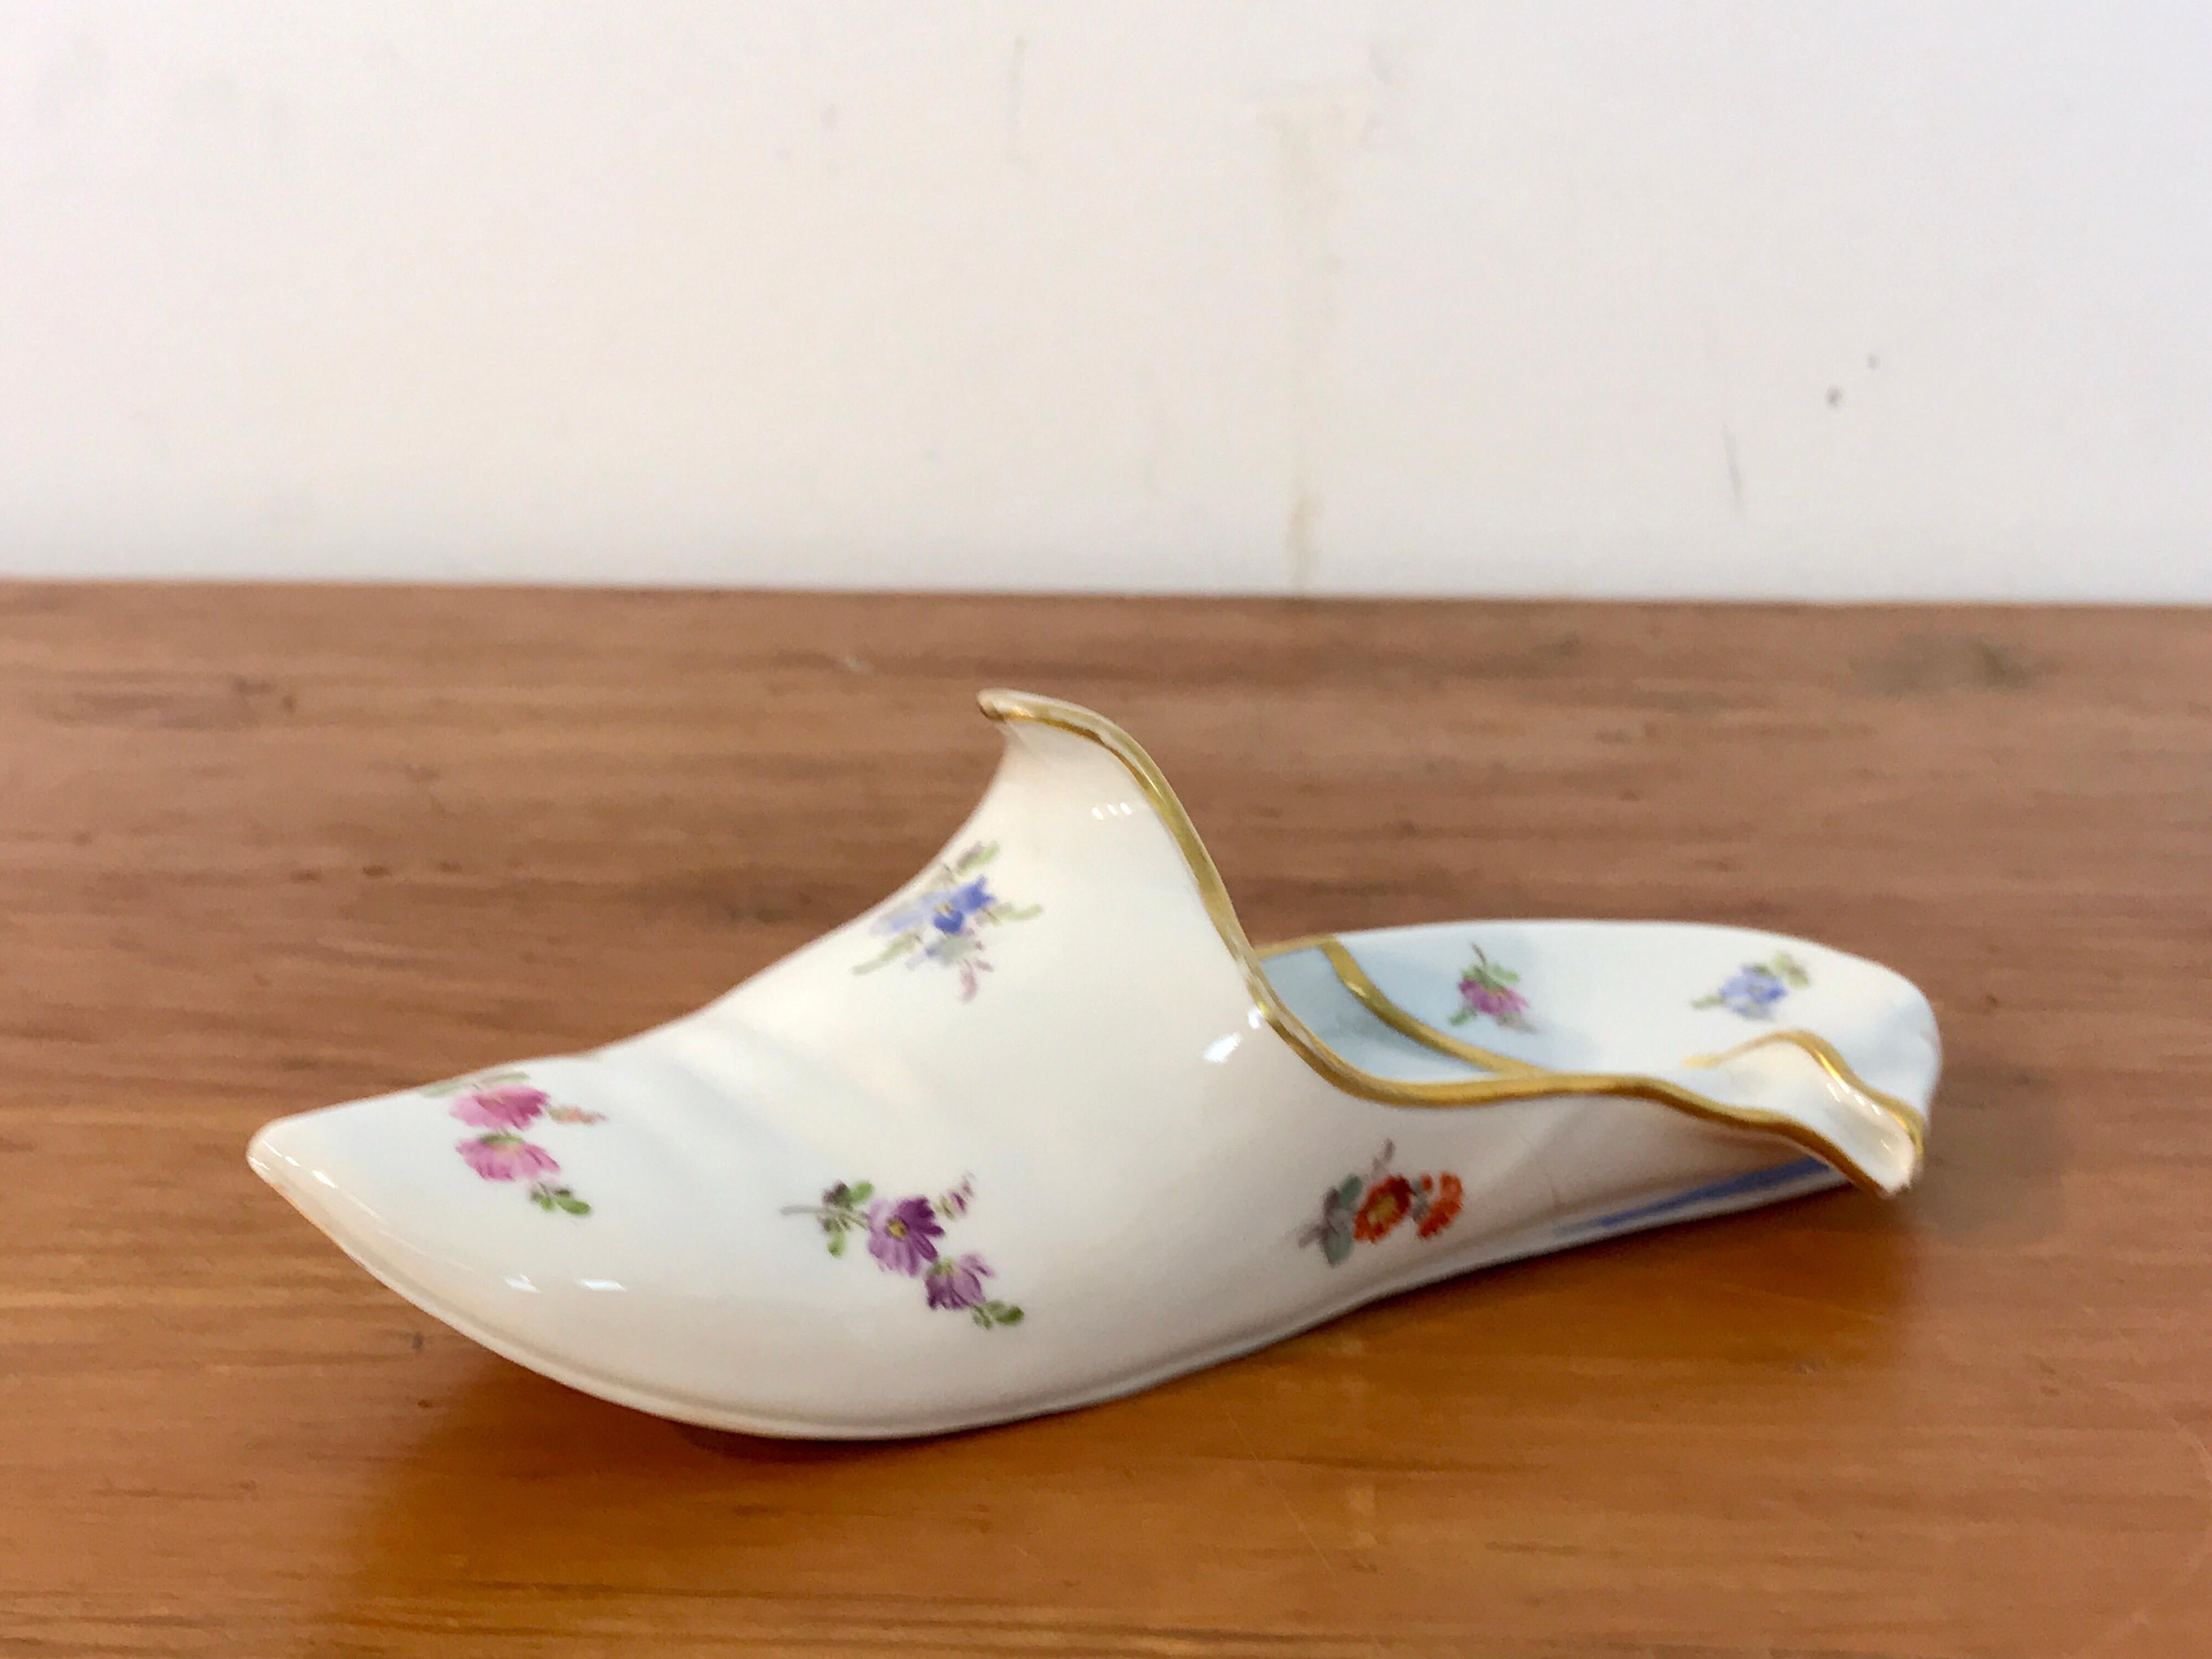 19th Century Meissen Model of a Slipper

Delve into the  high Victorian era with this enchanting 19th century Meissen model of a slipper. Crafted by the illustrious Meissen Porcelain, this artifact embodies the elegance of its time with intricate